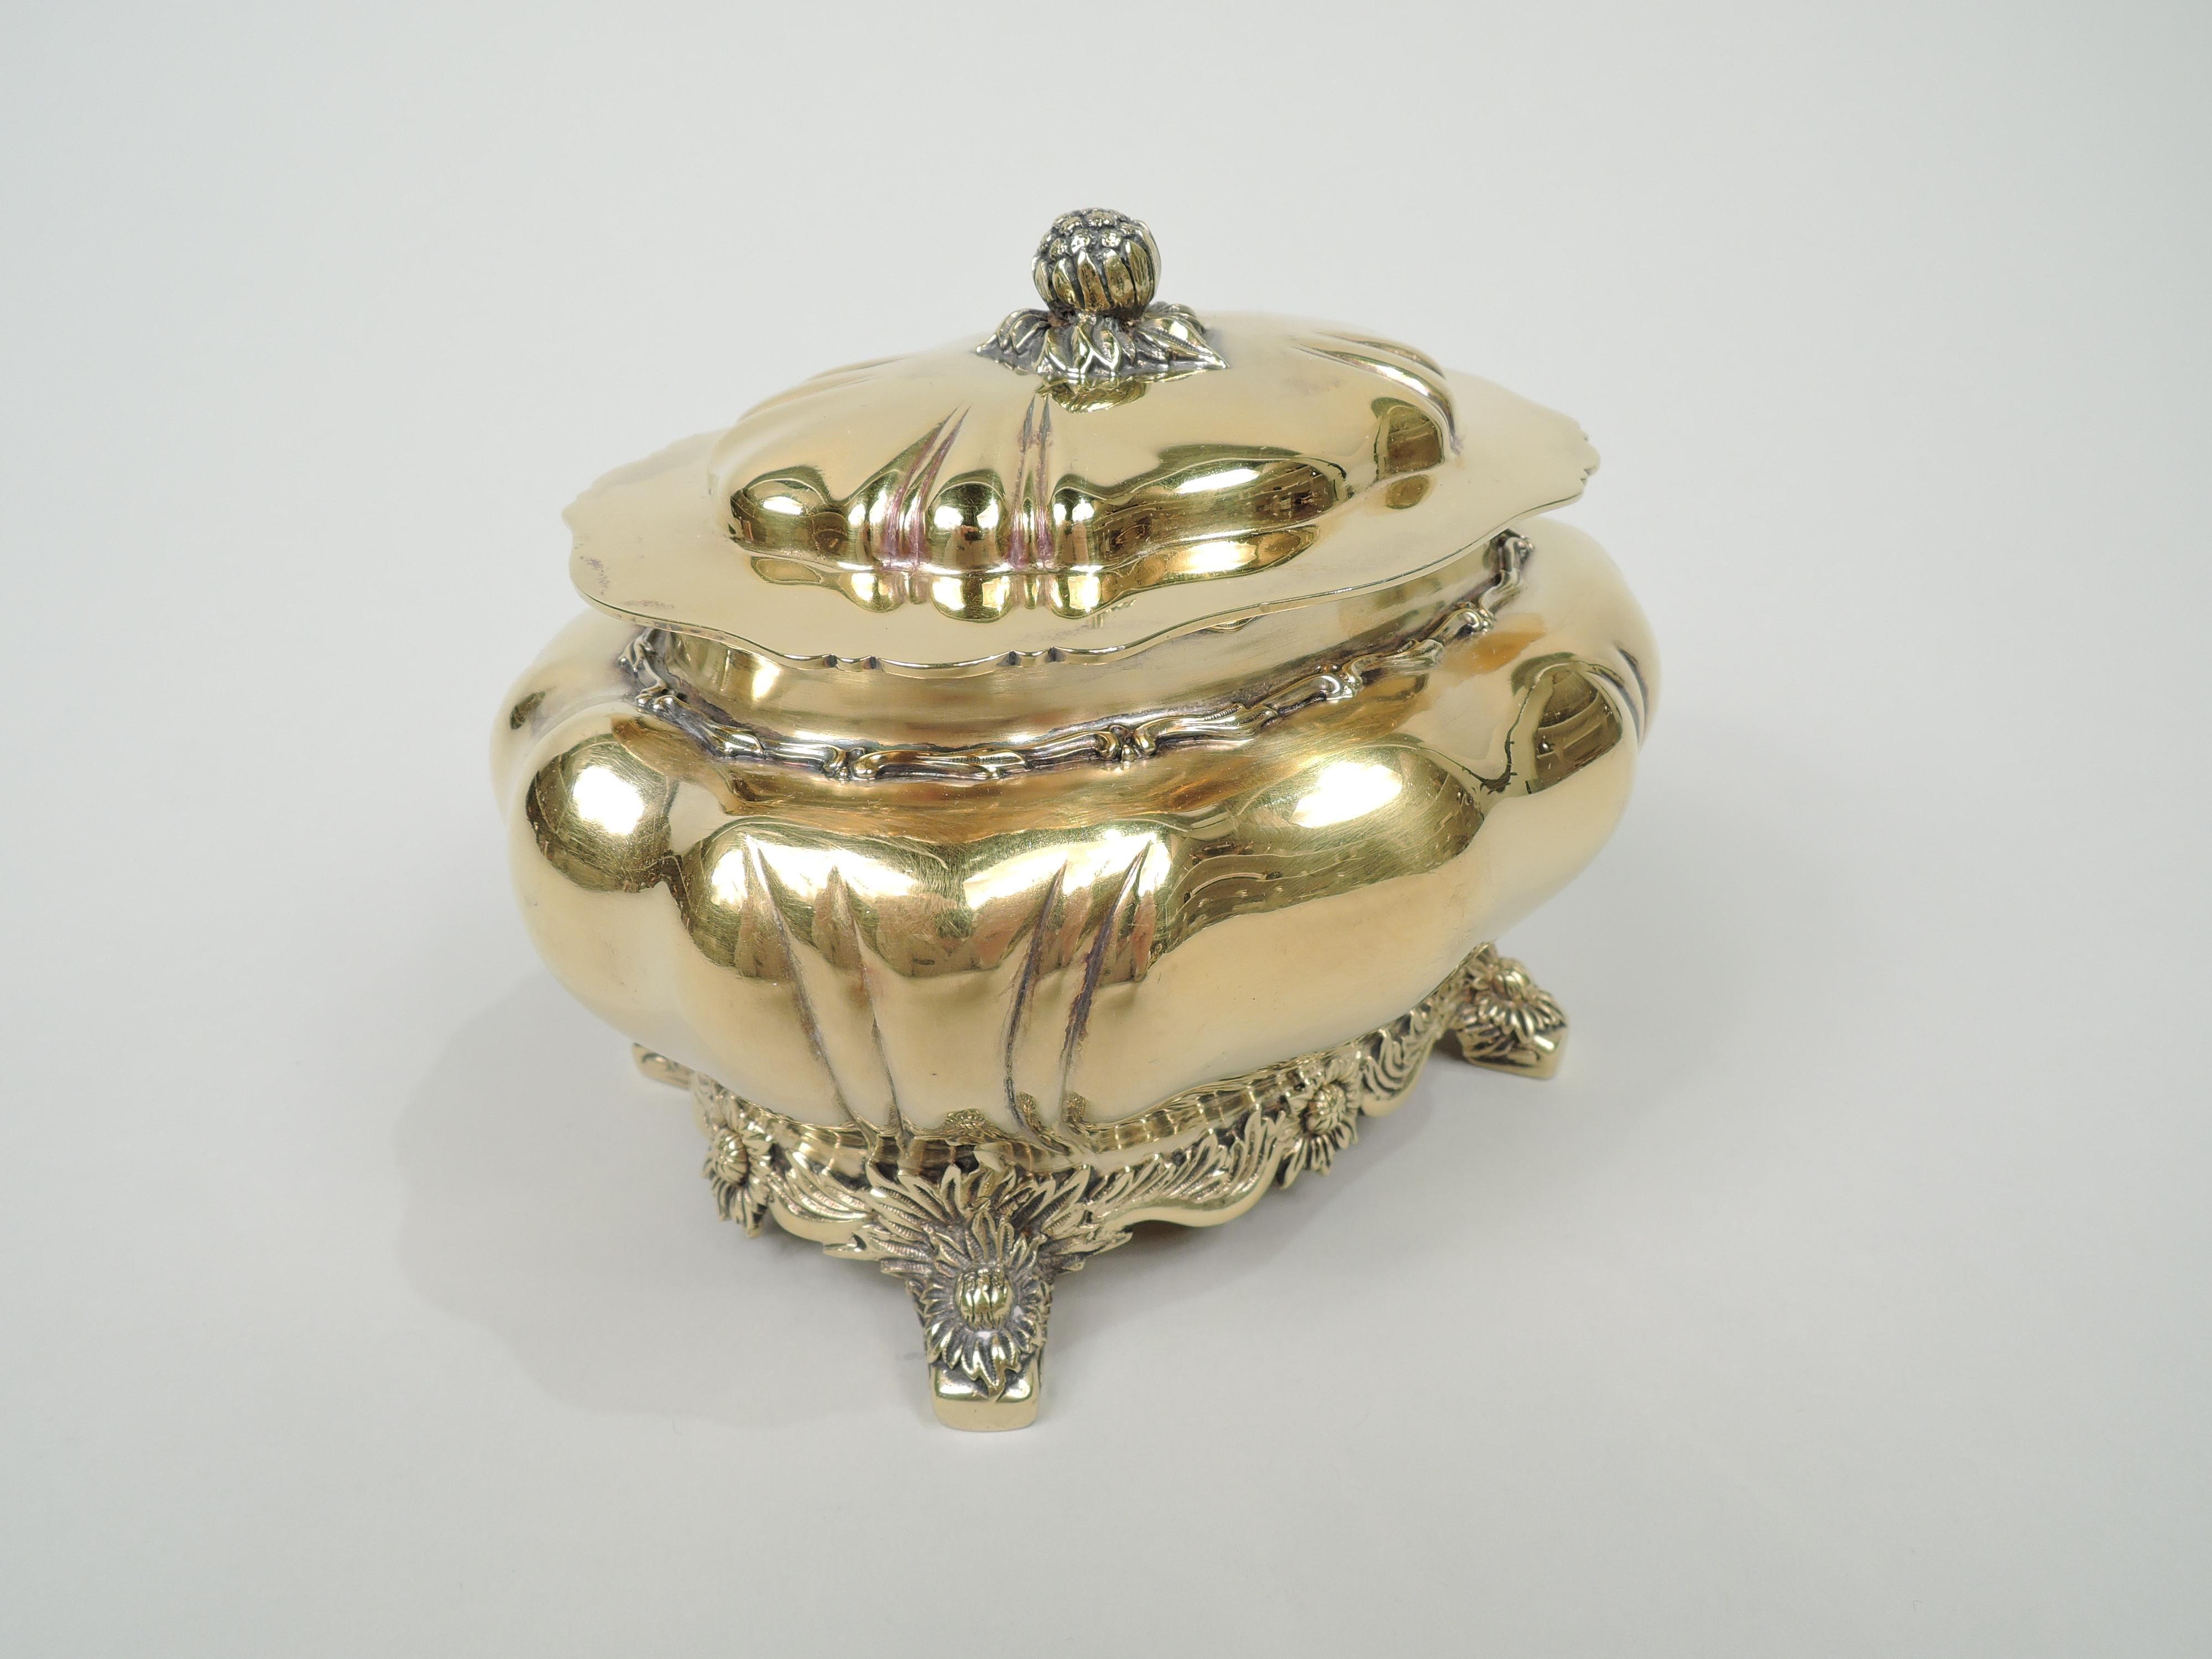 Chrysanthemum gilt sterling silver box. Made by Tiffany & Co. in New York. Traditional lobed and ovoid bowl with short and inset neck and splayed volute scroll supports. Cover hinged and domed with bud finial and plain and scrolled overhanging rim.